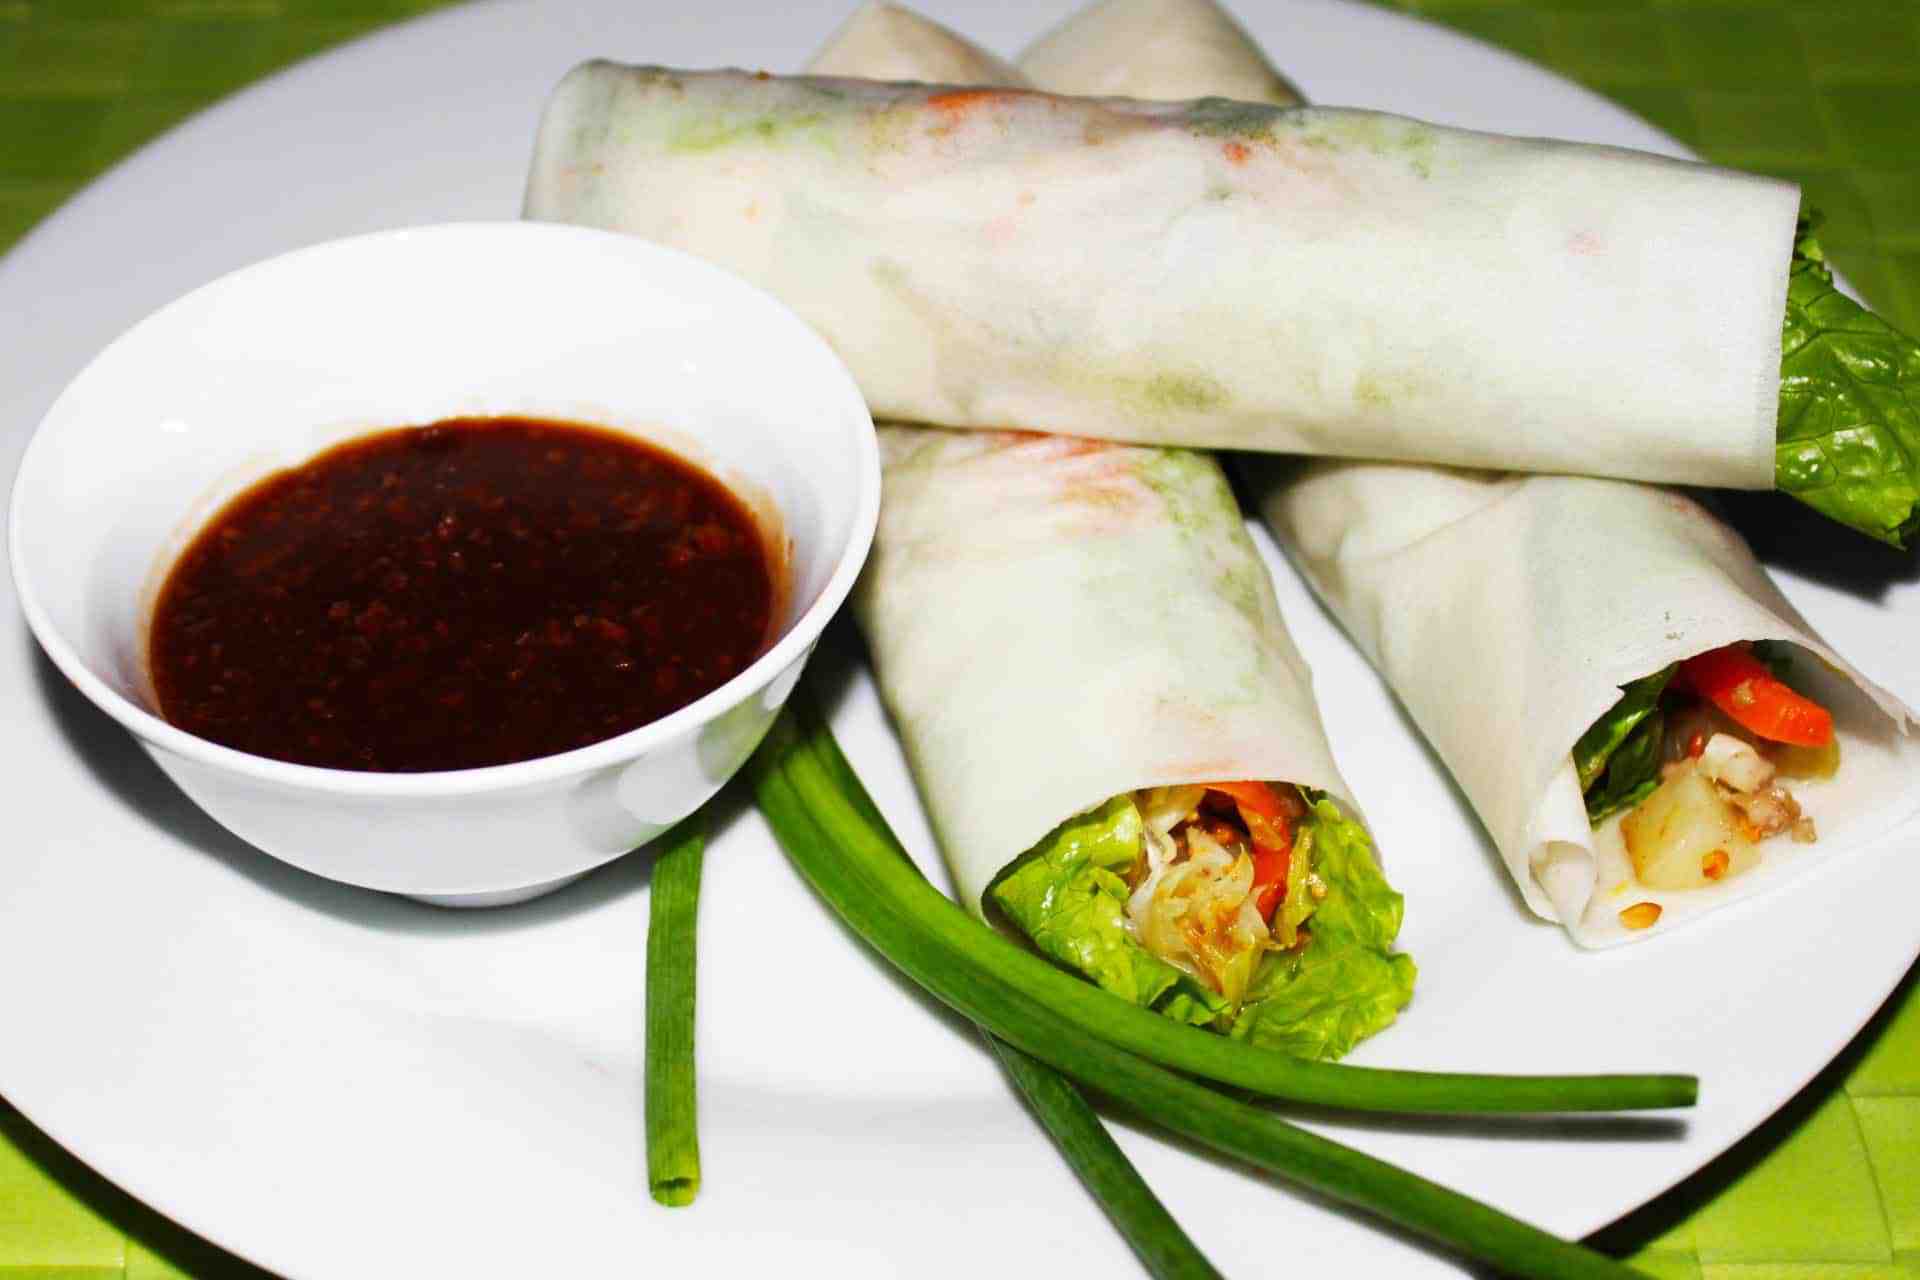 Spring rolls with dipping sauce